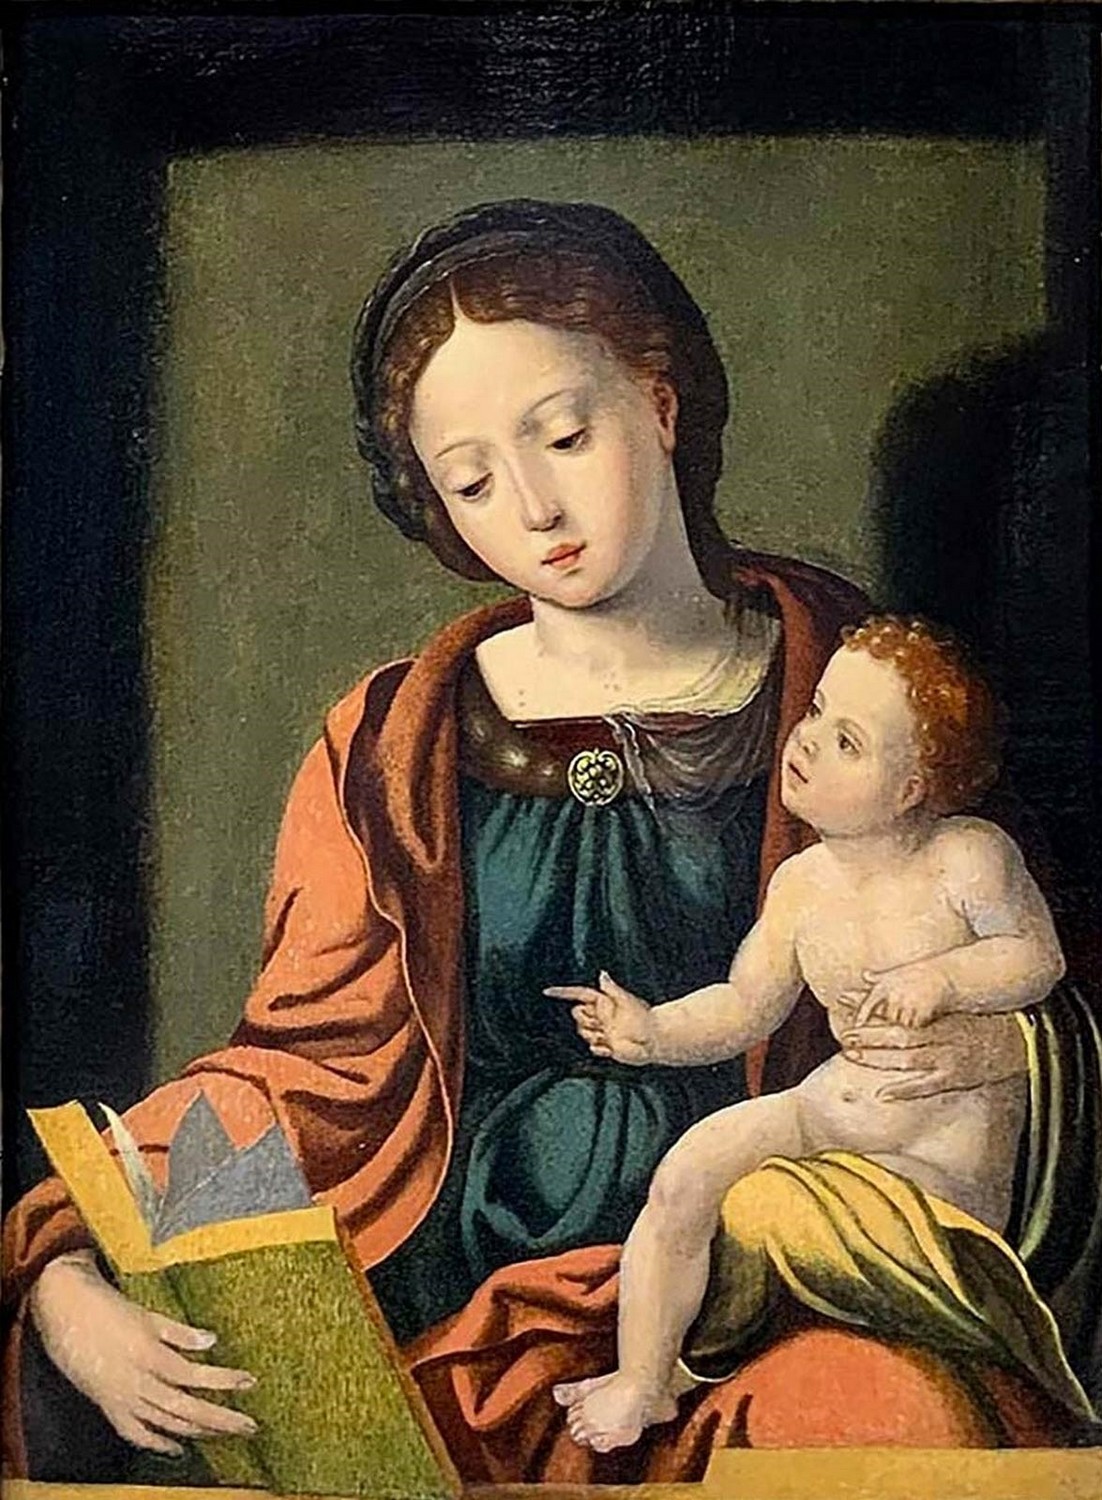 (allegedly by) Pieter Coecke van Aelst Virgin Mary with book and child Jesus.